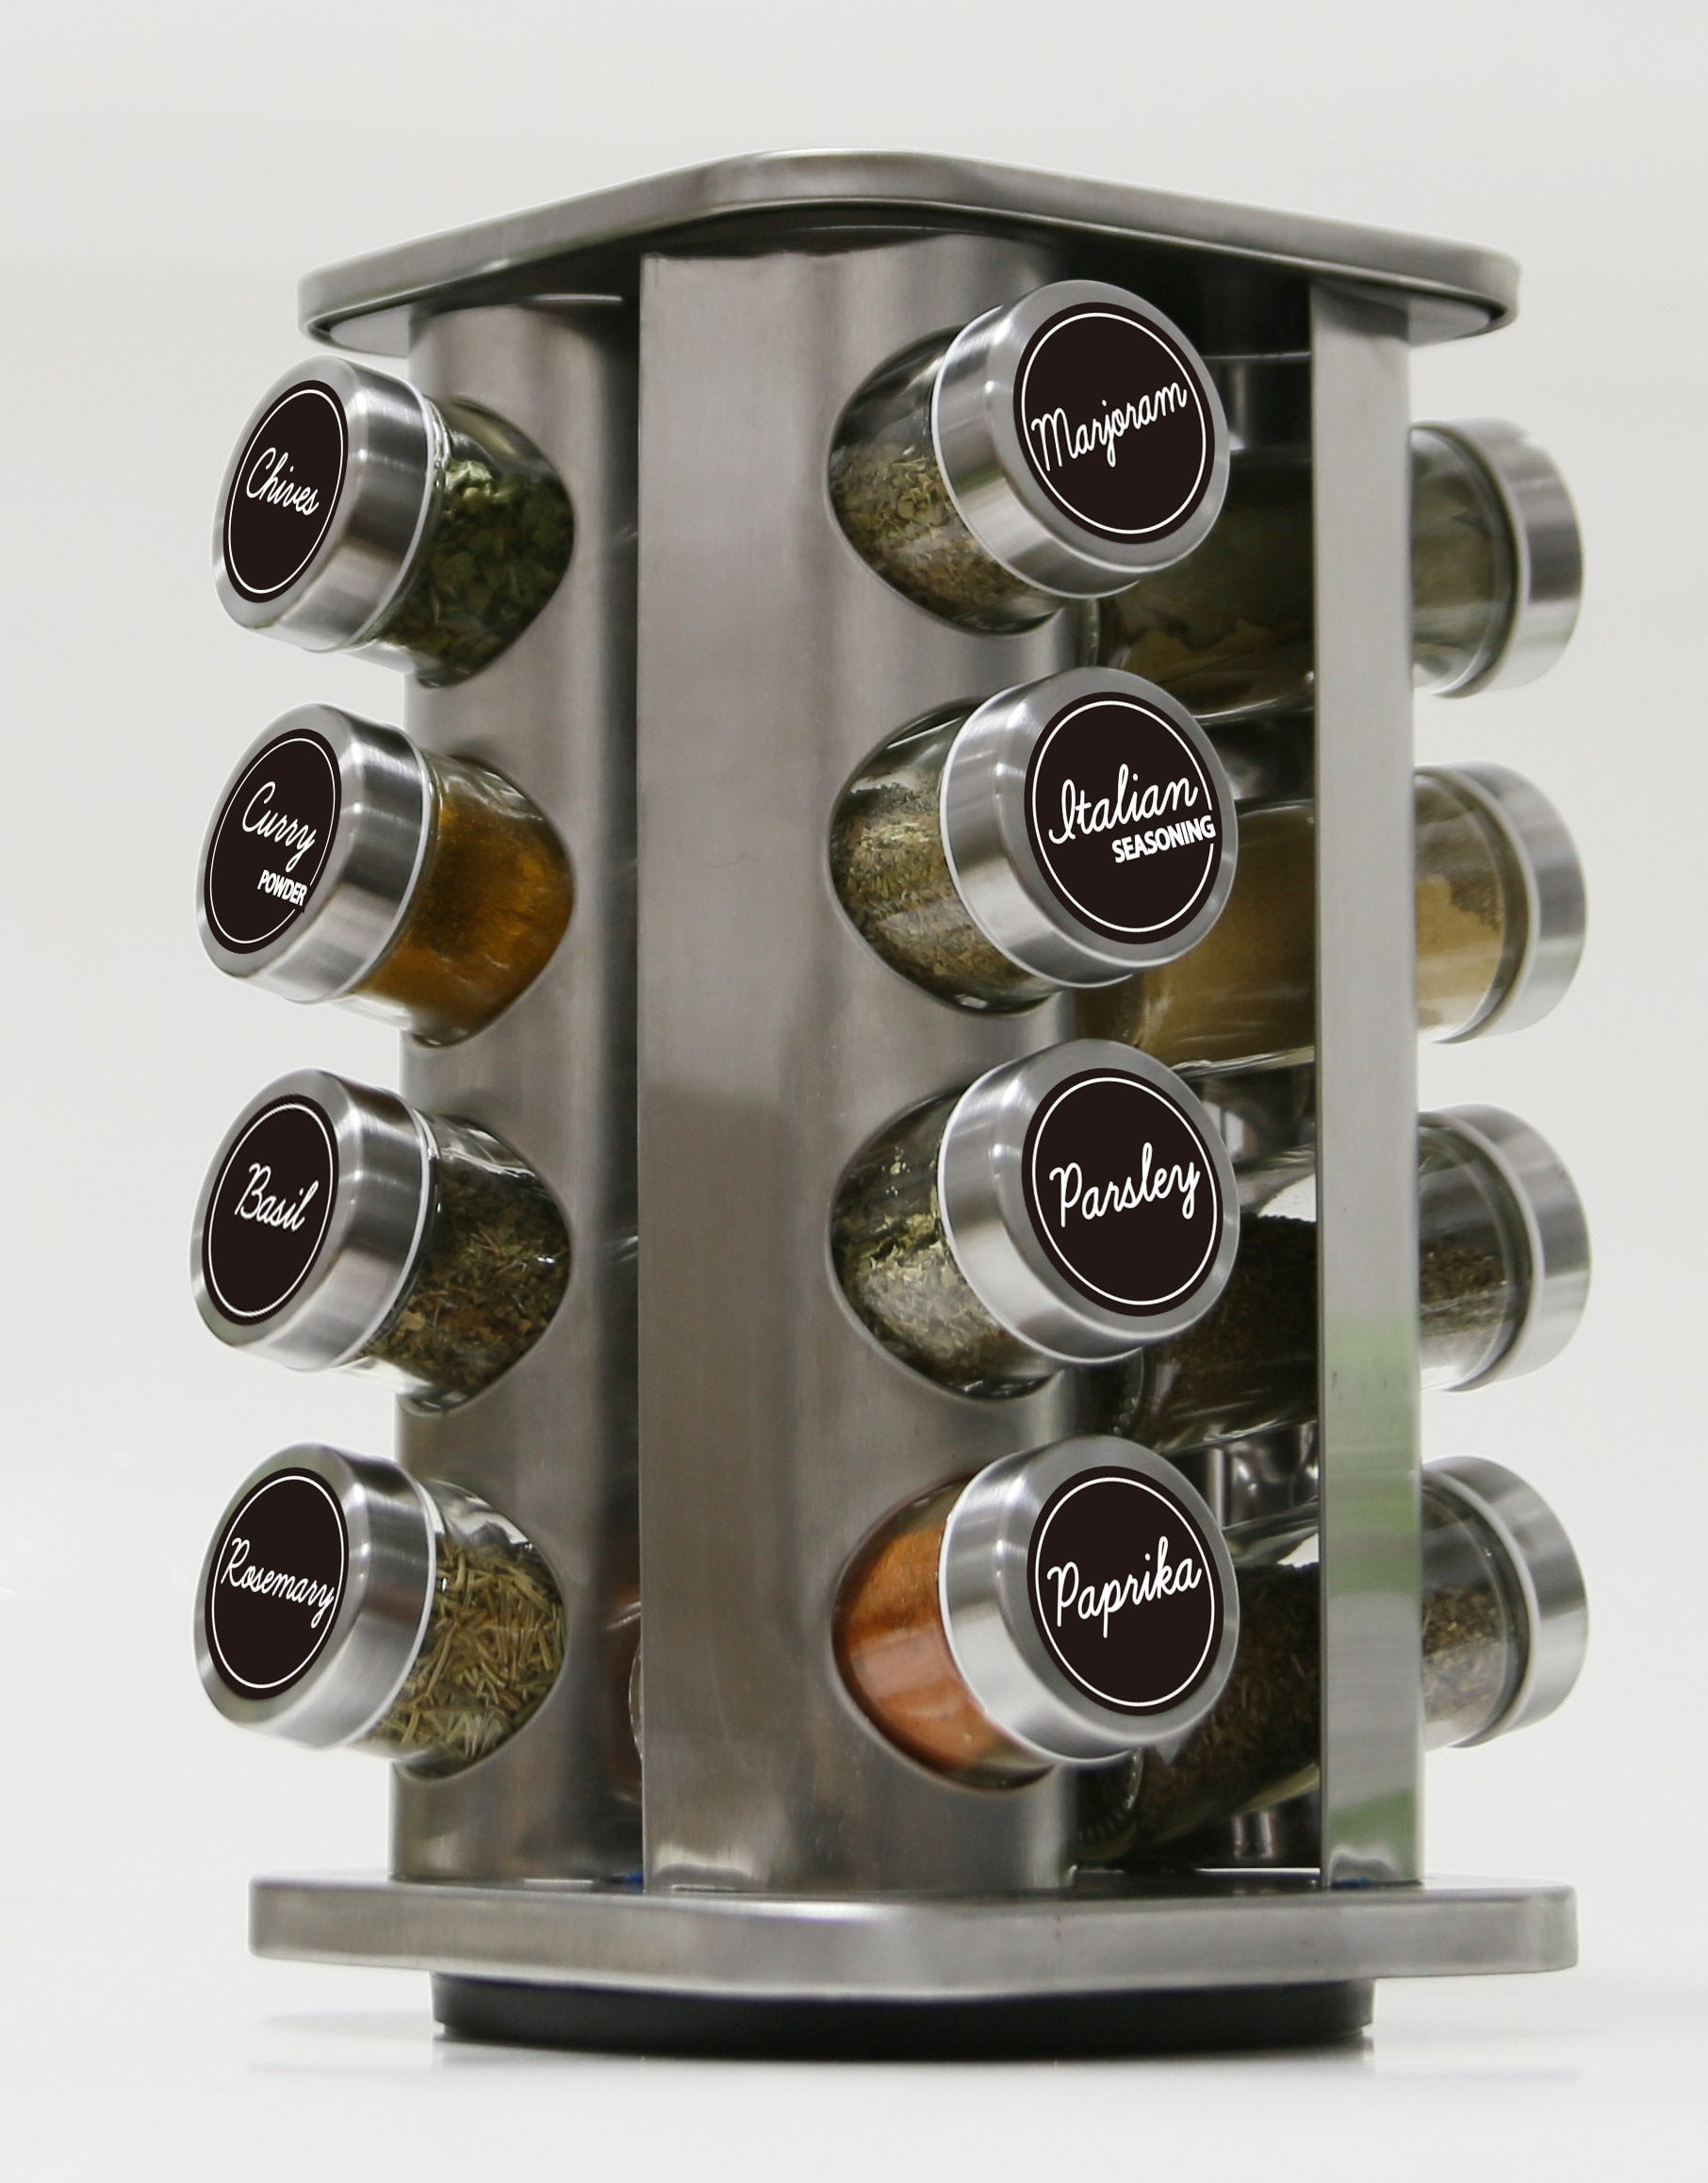 16 Jar Revolving Spice Rack with Glass Bottles Rotating for Herbs and Spices 